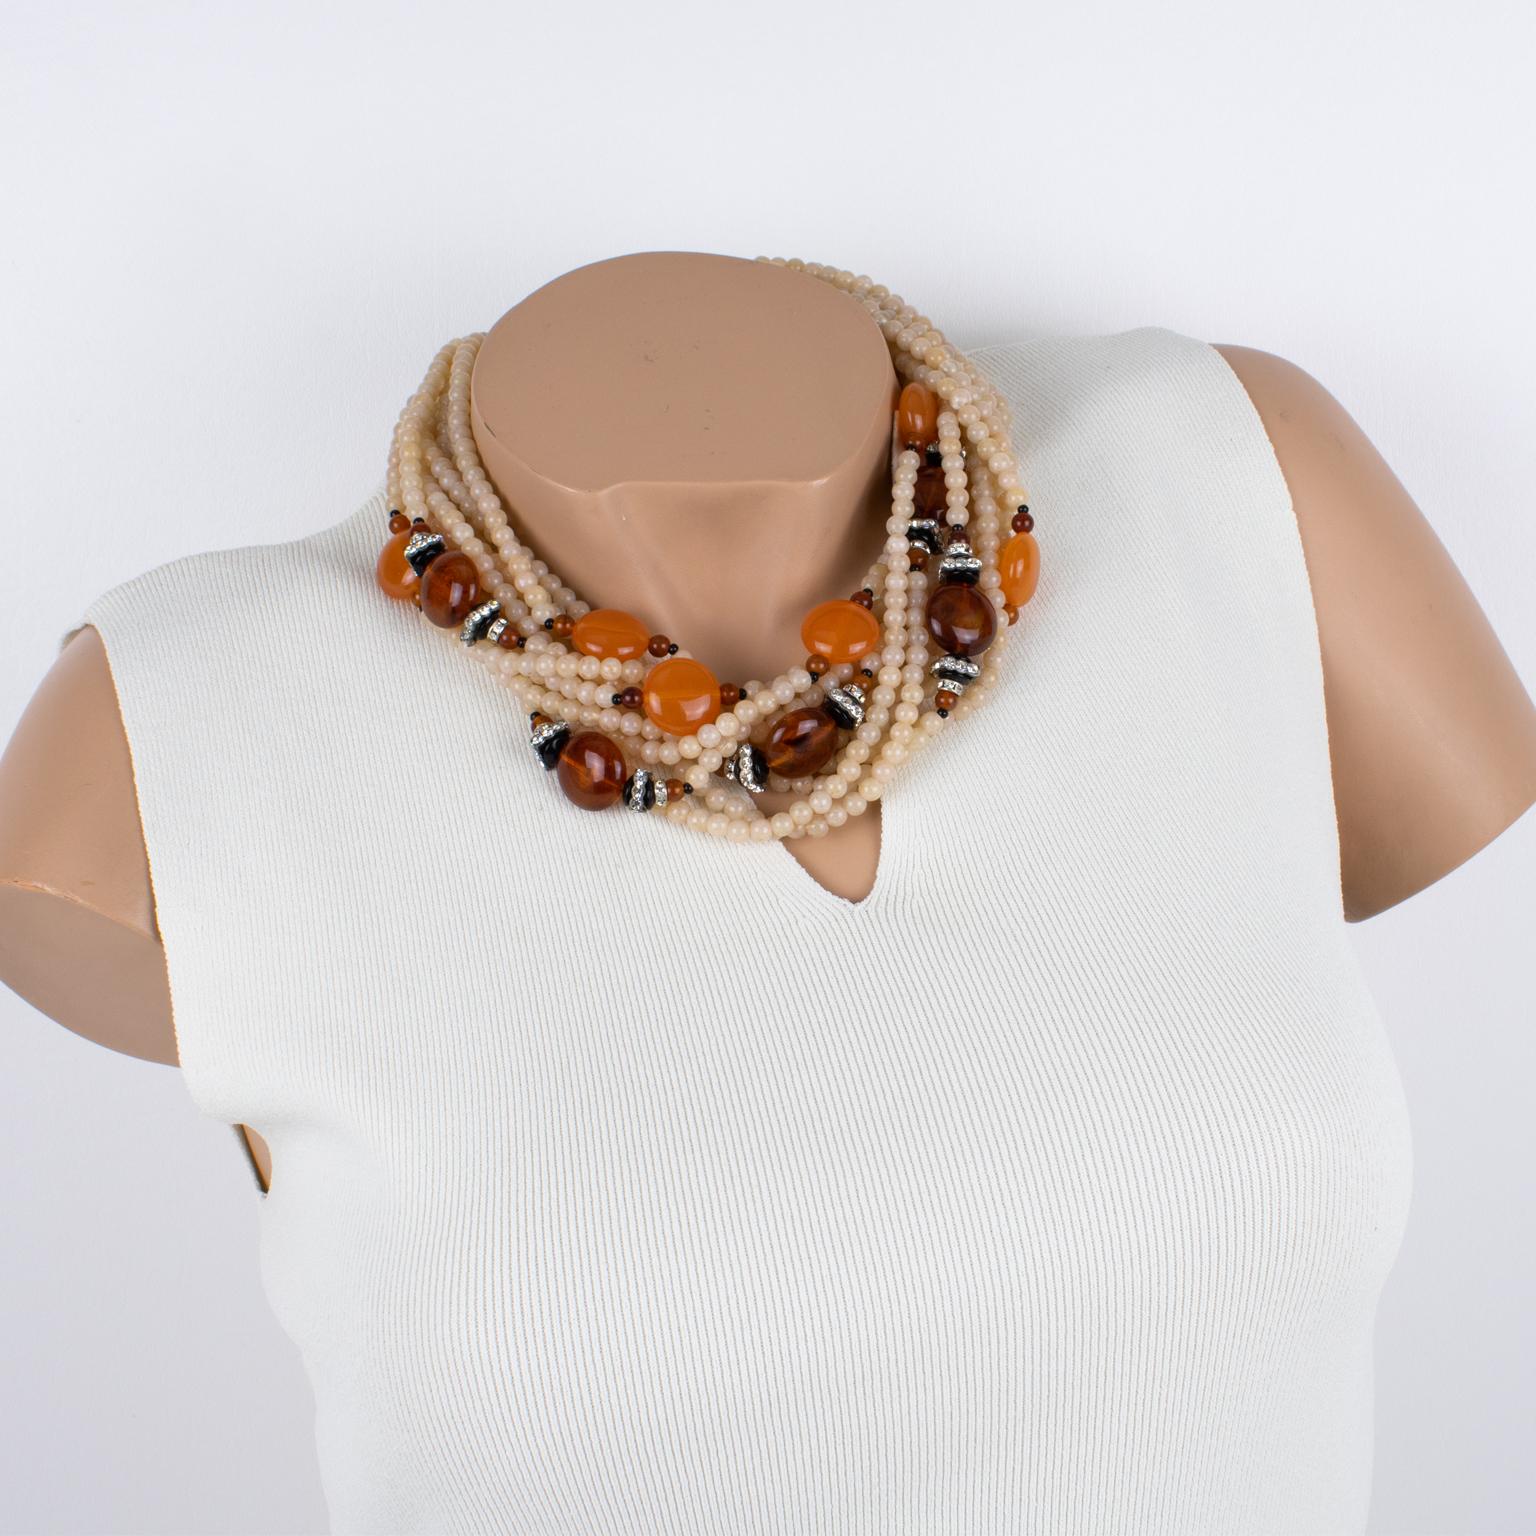 Angela Caputi created this elegant resin-beaded choker necklace in Italy. The piece features an oversized multi-strand design with a dominant pink-white latte color contrasted with amber and tangerine-orange round pebbles and tiny crystal rhinestone